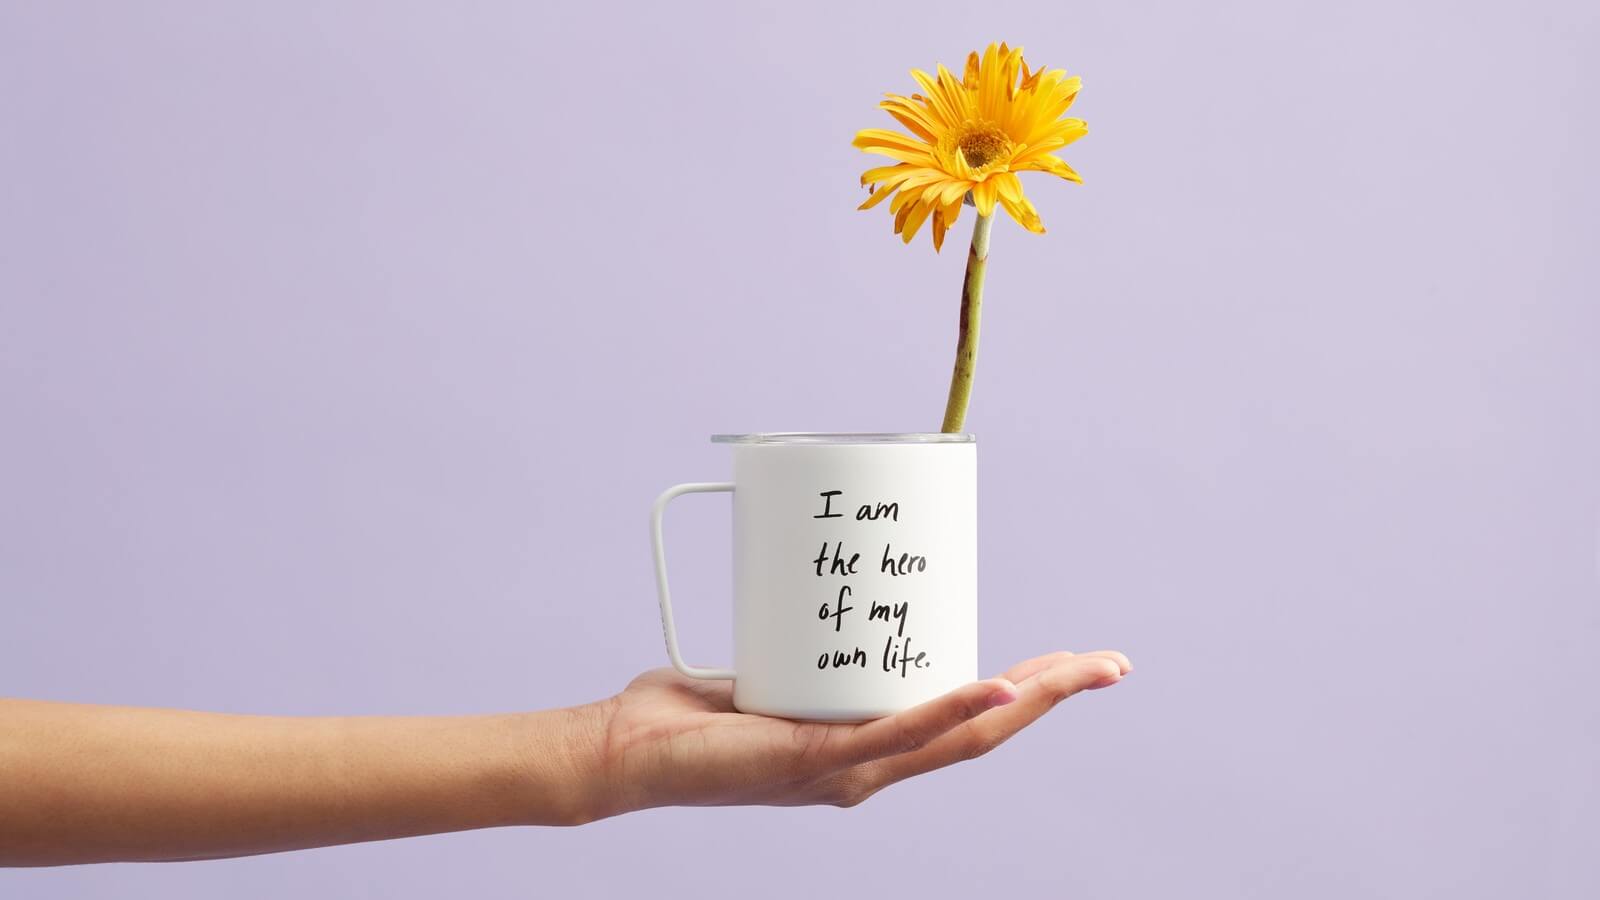 A person holding a mug with a yellow flower in a white mug.